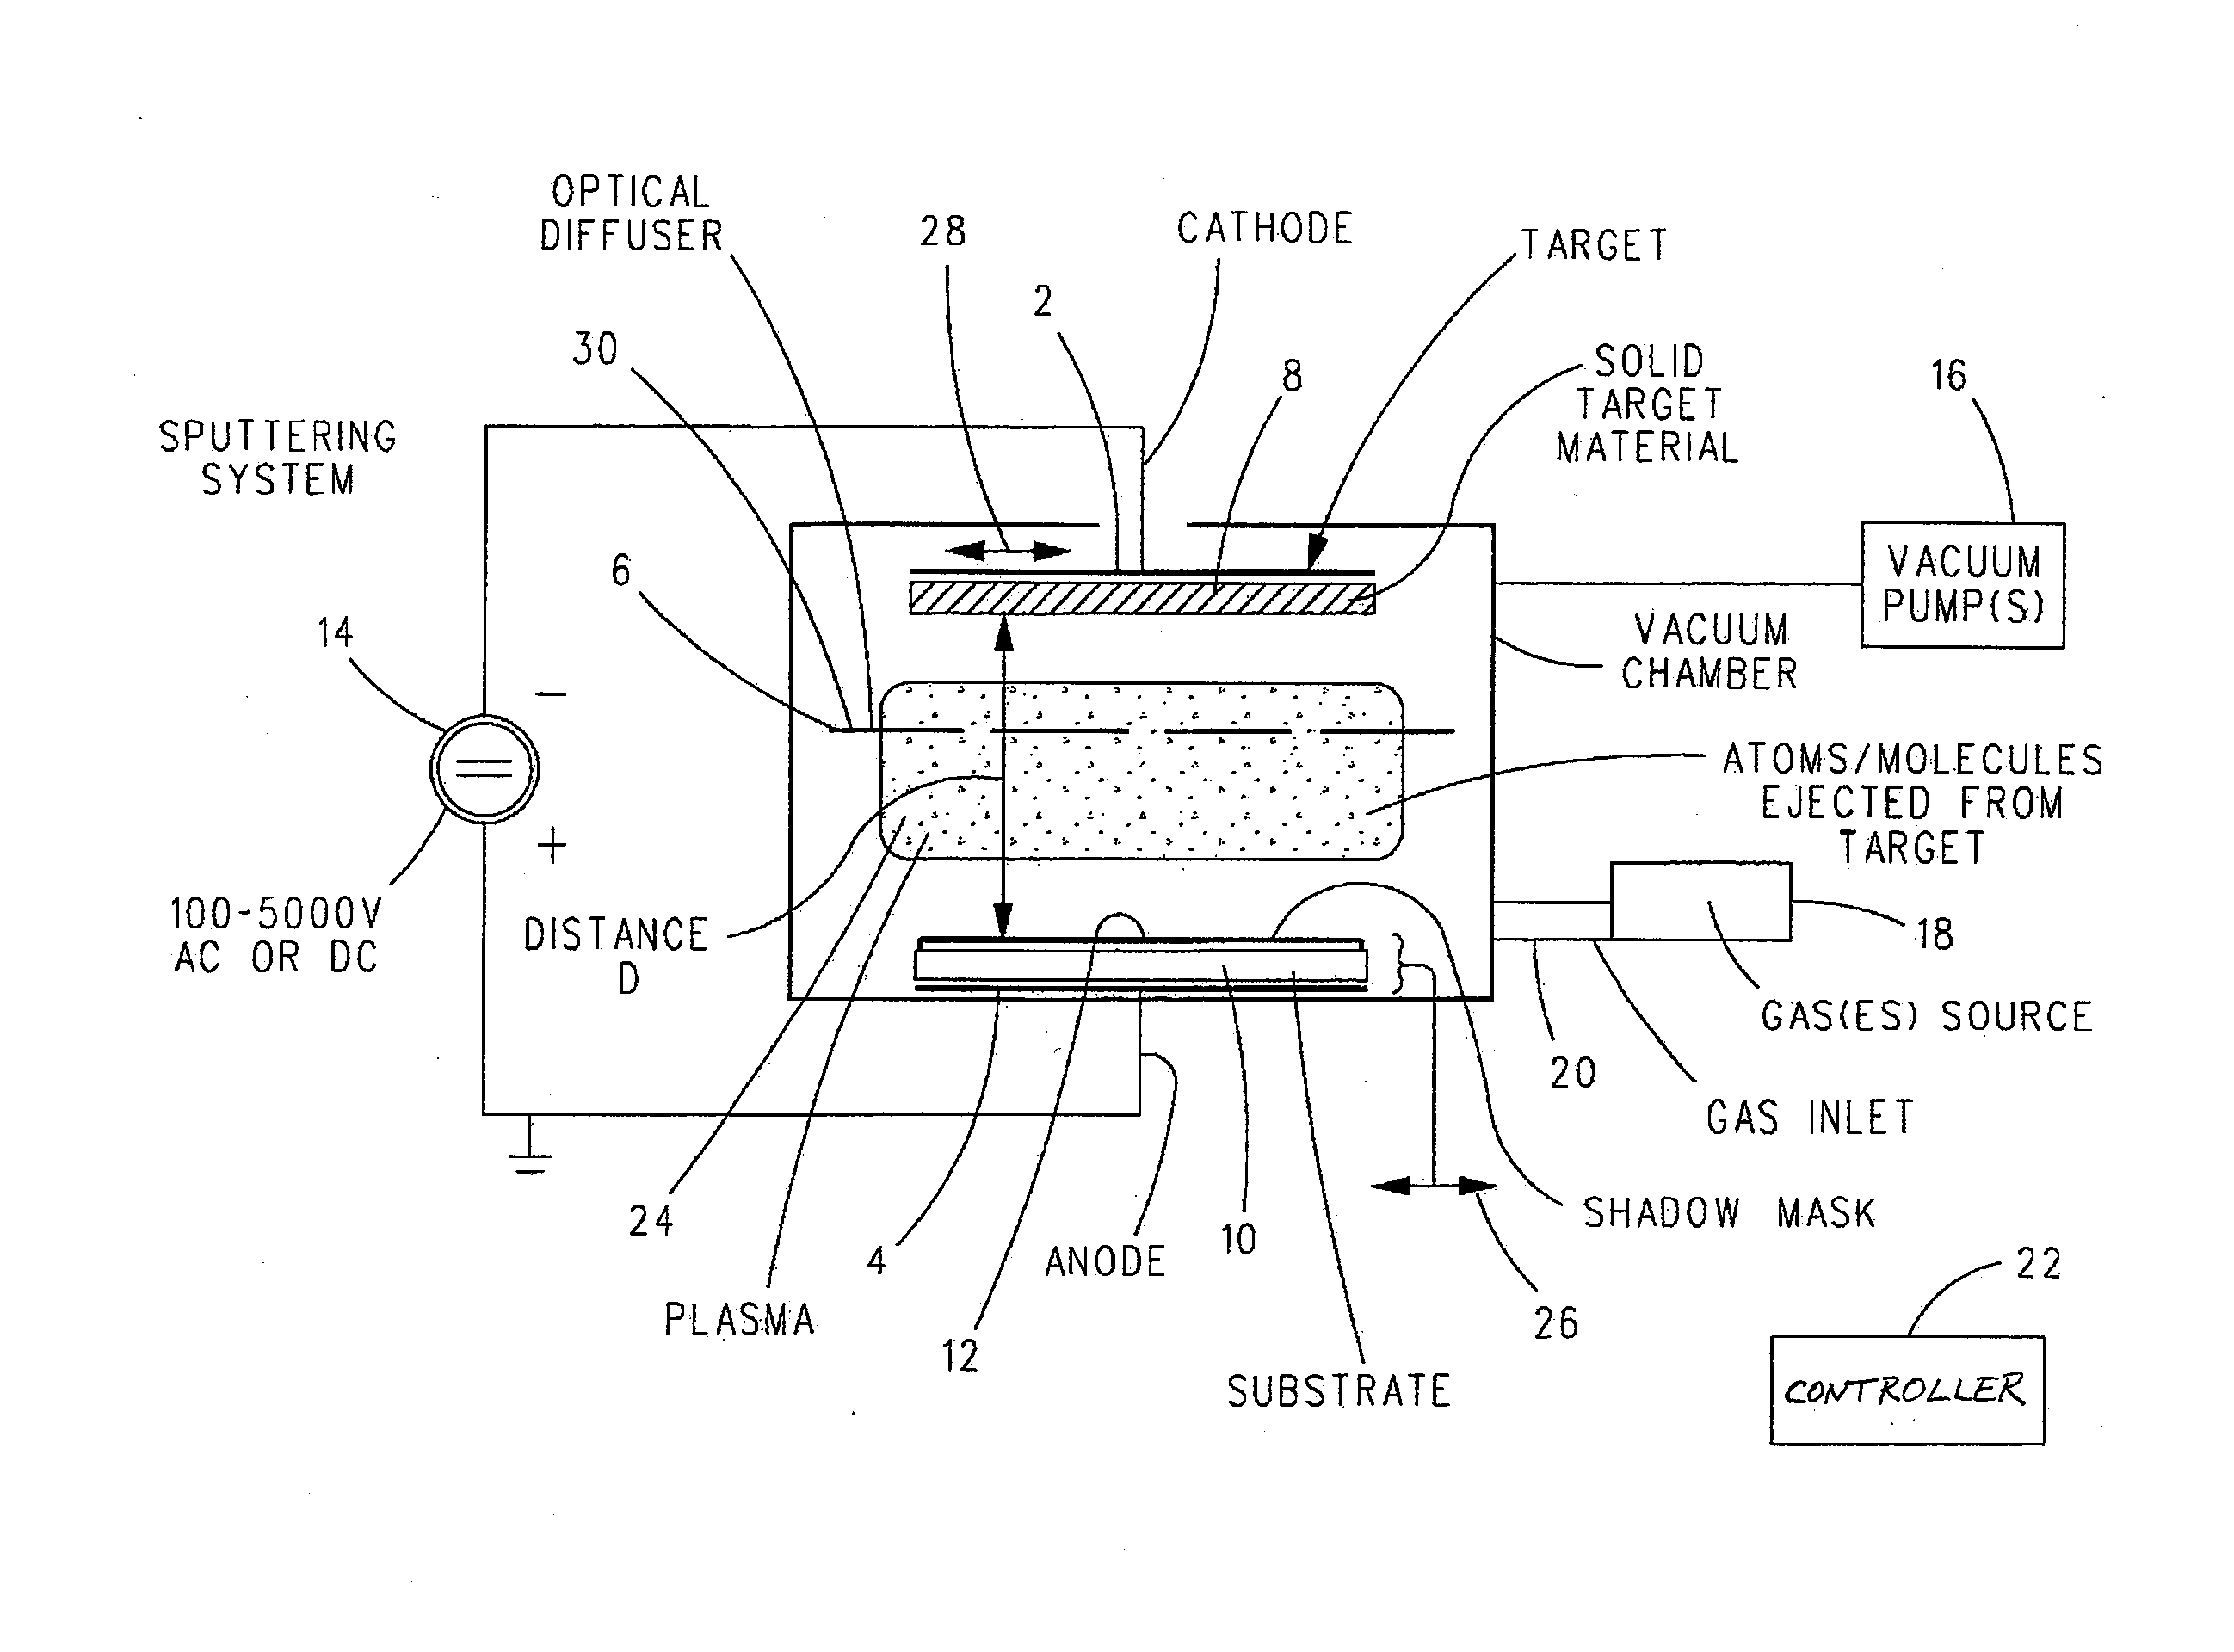 Small Feature Size Fabrication Using a Shadow Mask Deposition Process